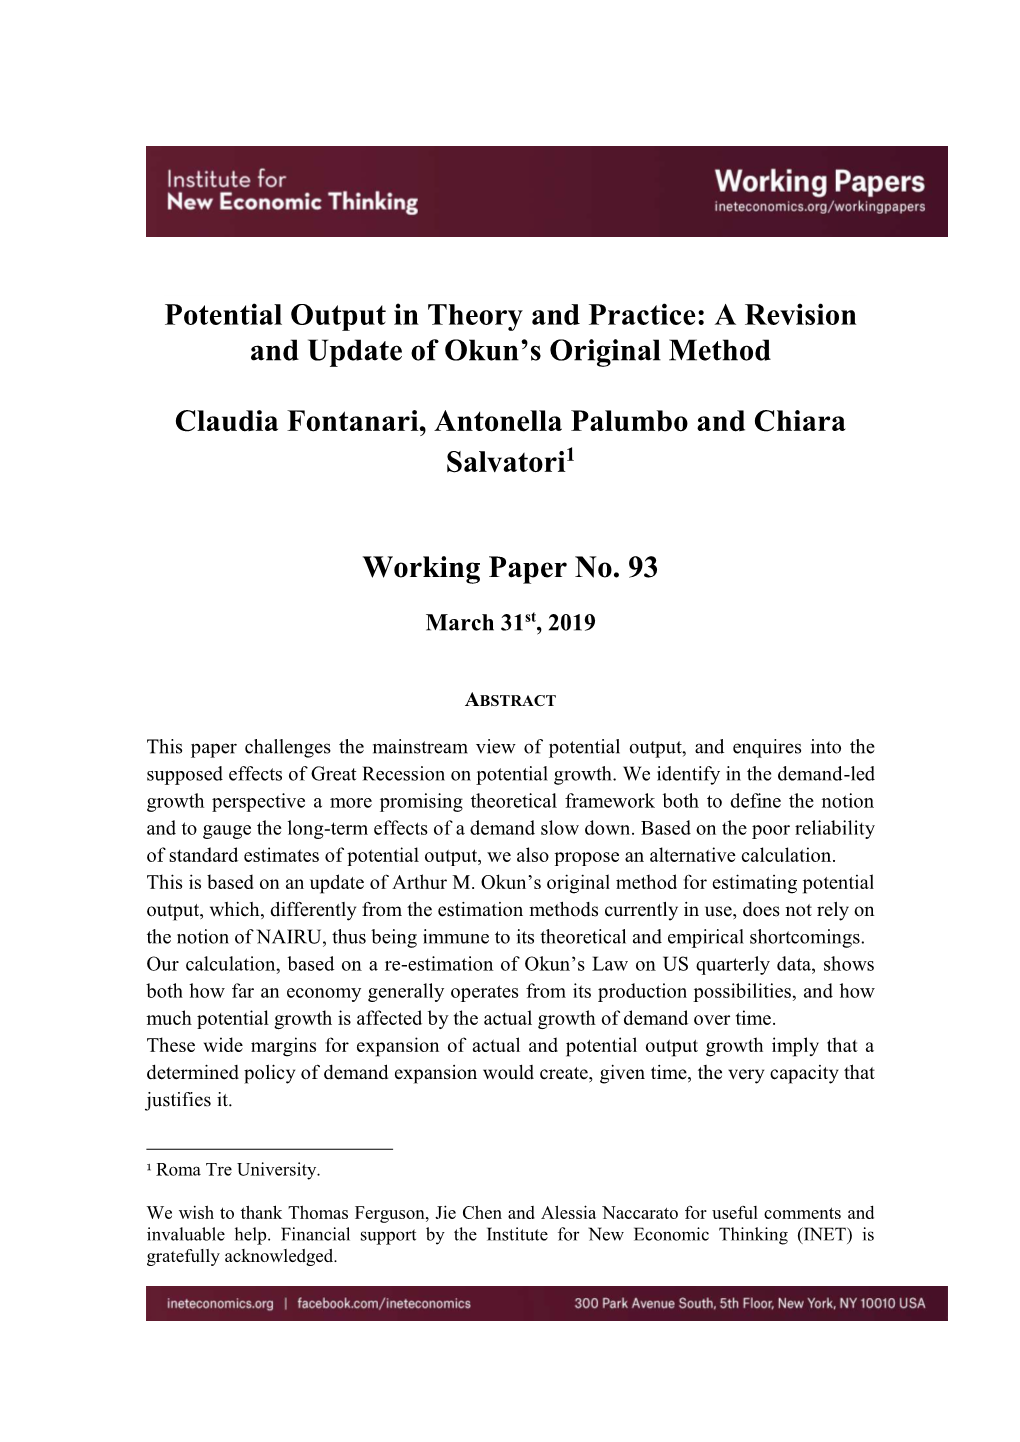 Potential Output in Theory and Practice: a Revision and Update of Okun’S Original Method